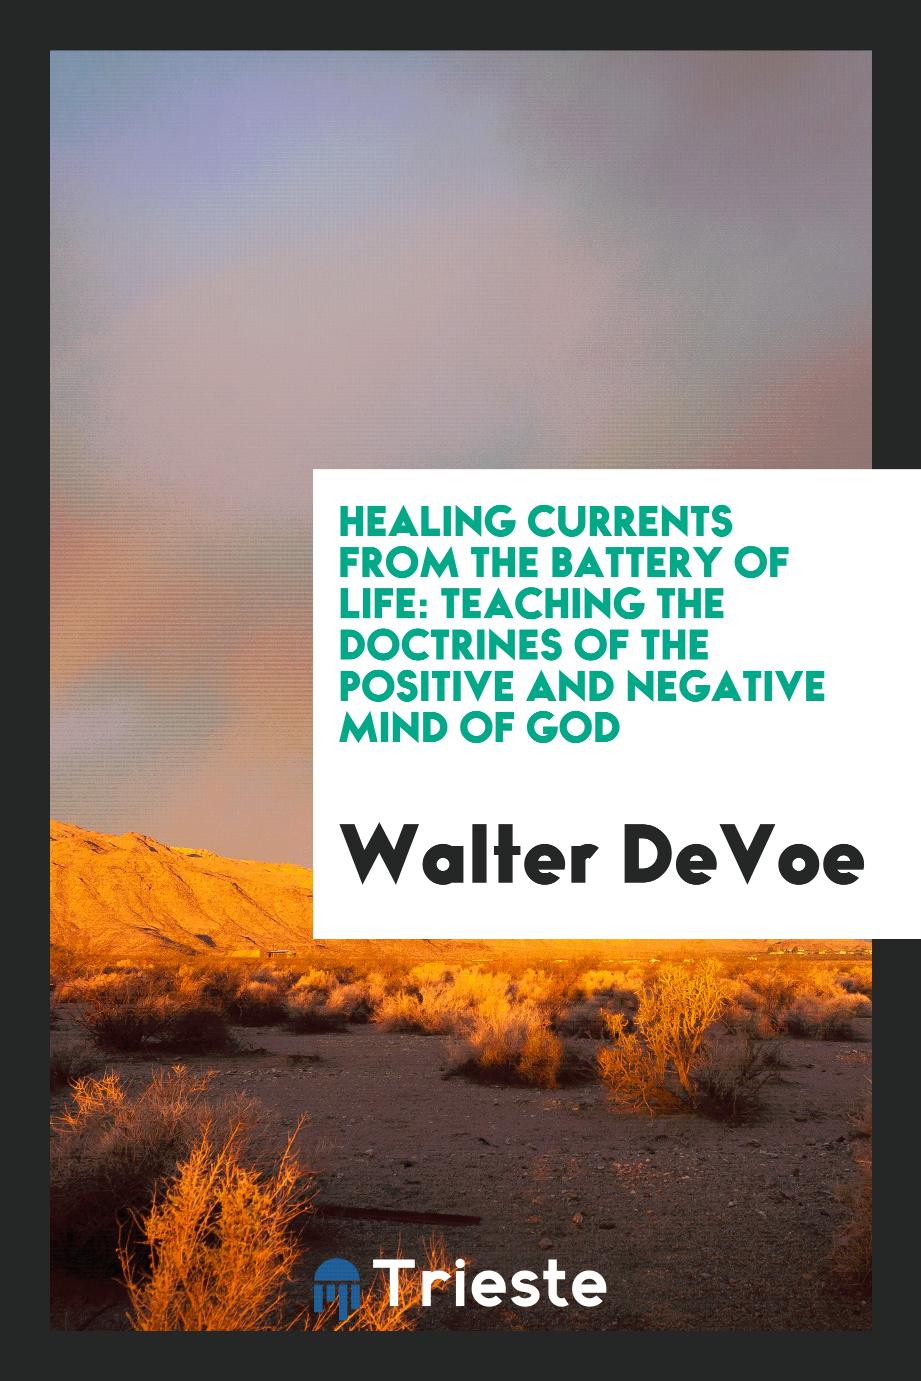 Healing Currents from the Battery of Life: Teaching the Doctrines of the Positive and Negative Mind of God